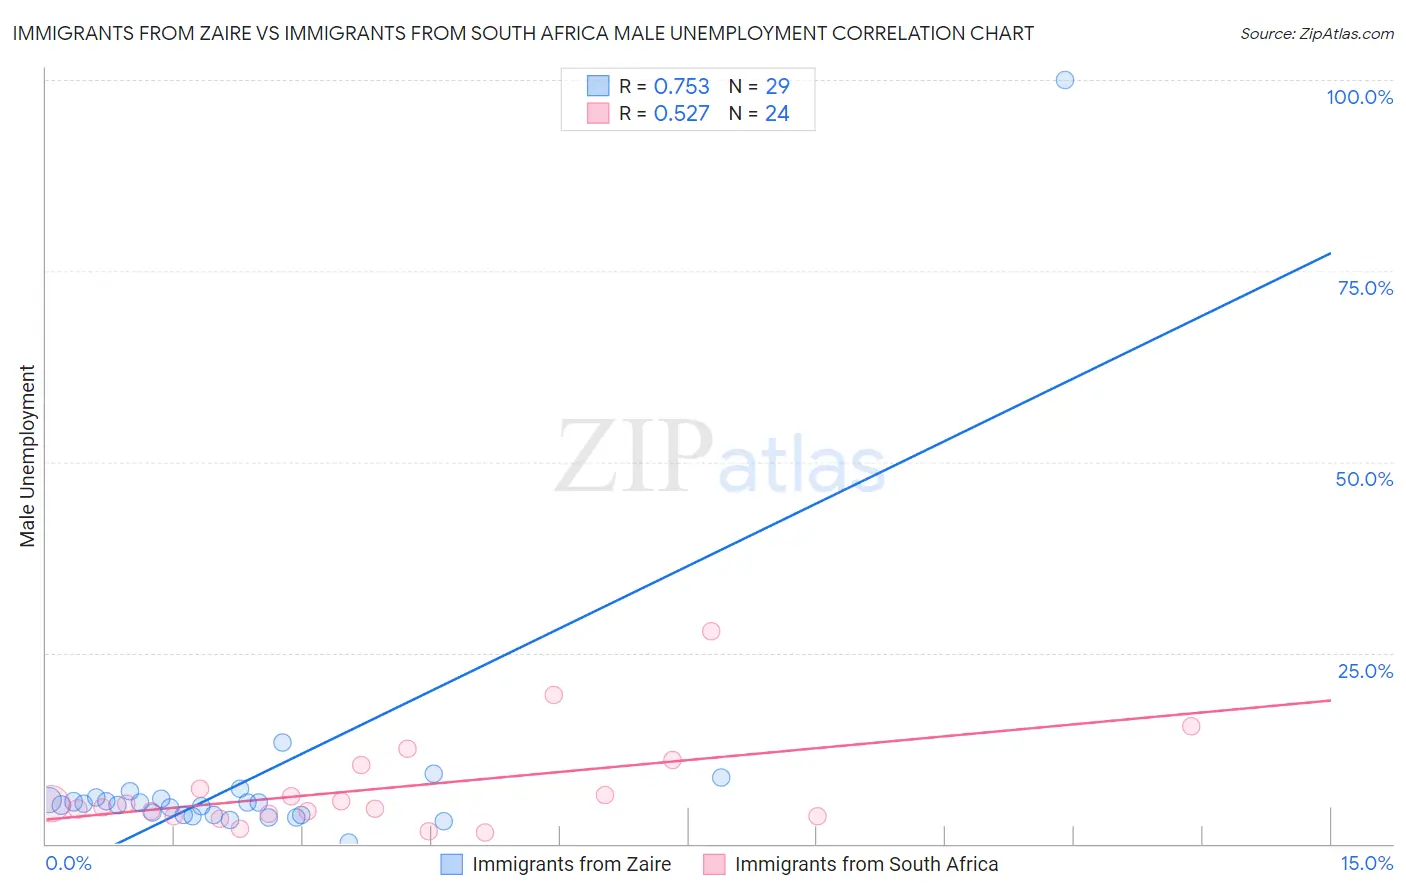 Immigrants from Zaire vs Immigrants from South Africa Male Unemployment